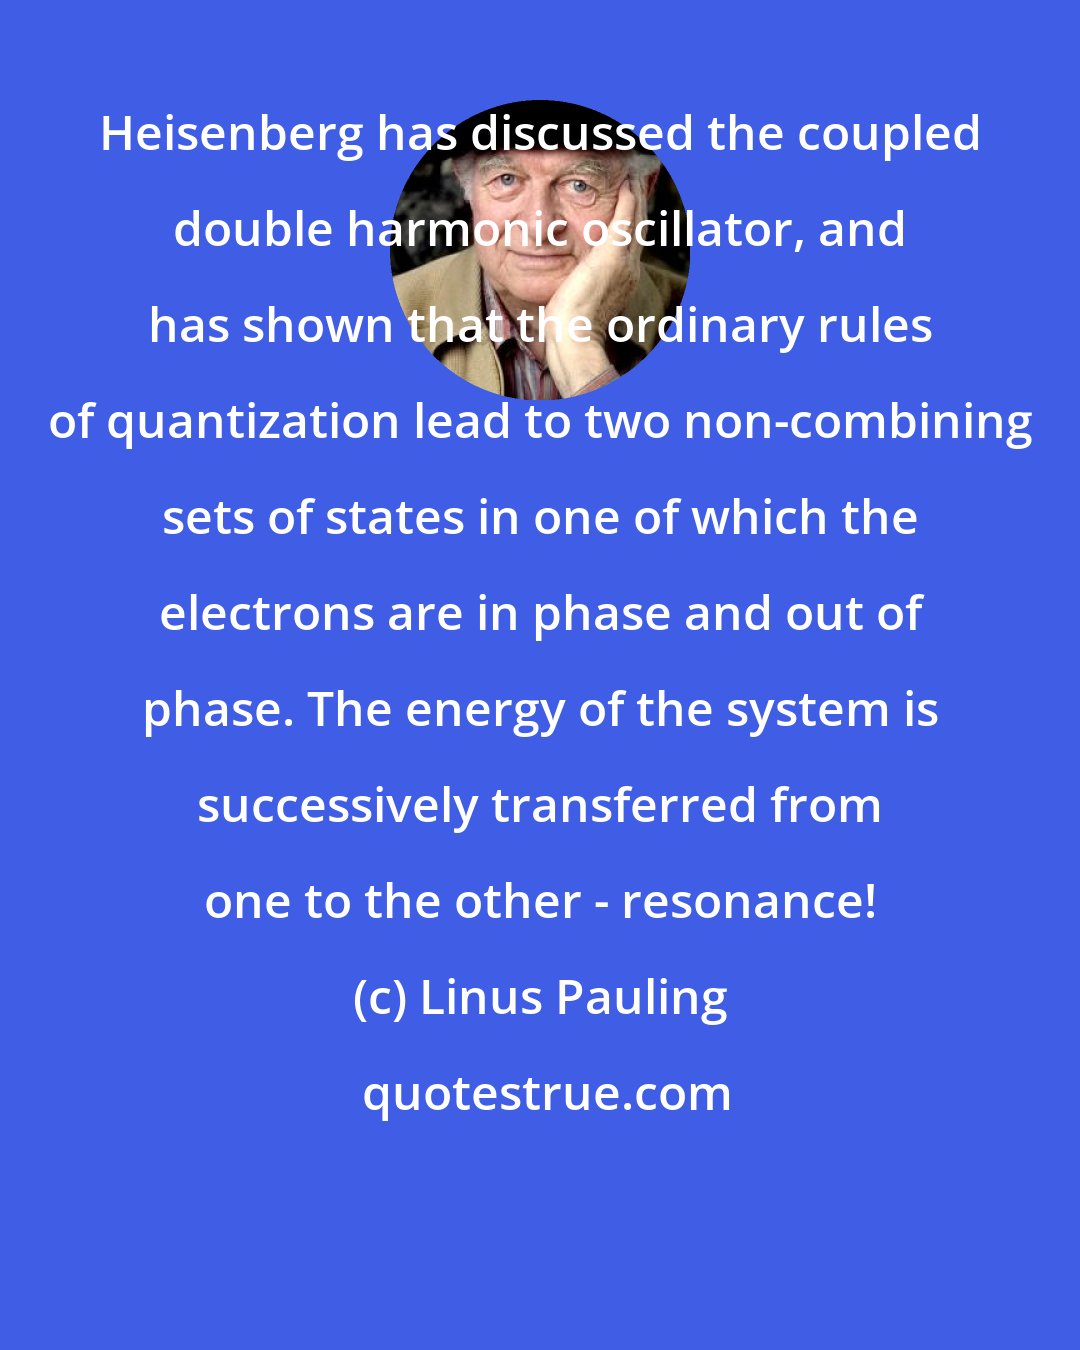 Linus Pauling: Heisenberg has discussed the coupled double harmonic oscillator, and has shown that the ordinary rules of quantization lead to two non-combining sets of states in one of which the electrons are in phase and out of phase. The energy of the system is successively transferred from one to the other - resonance!